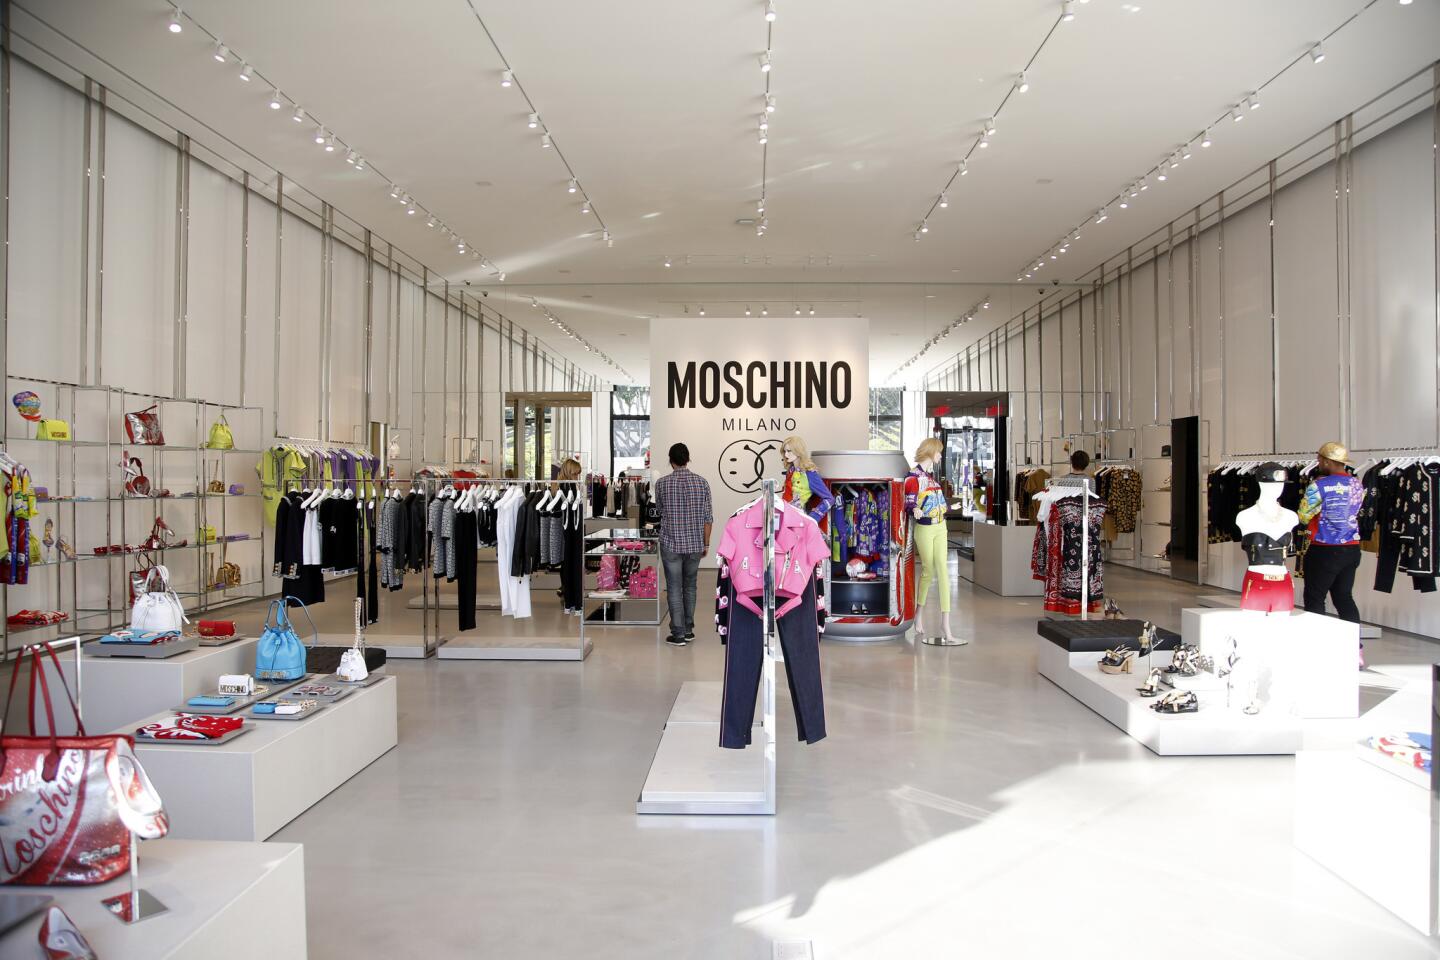 The interior of the new Moschino store in Los Angeles is open and bright.